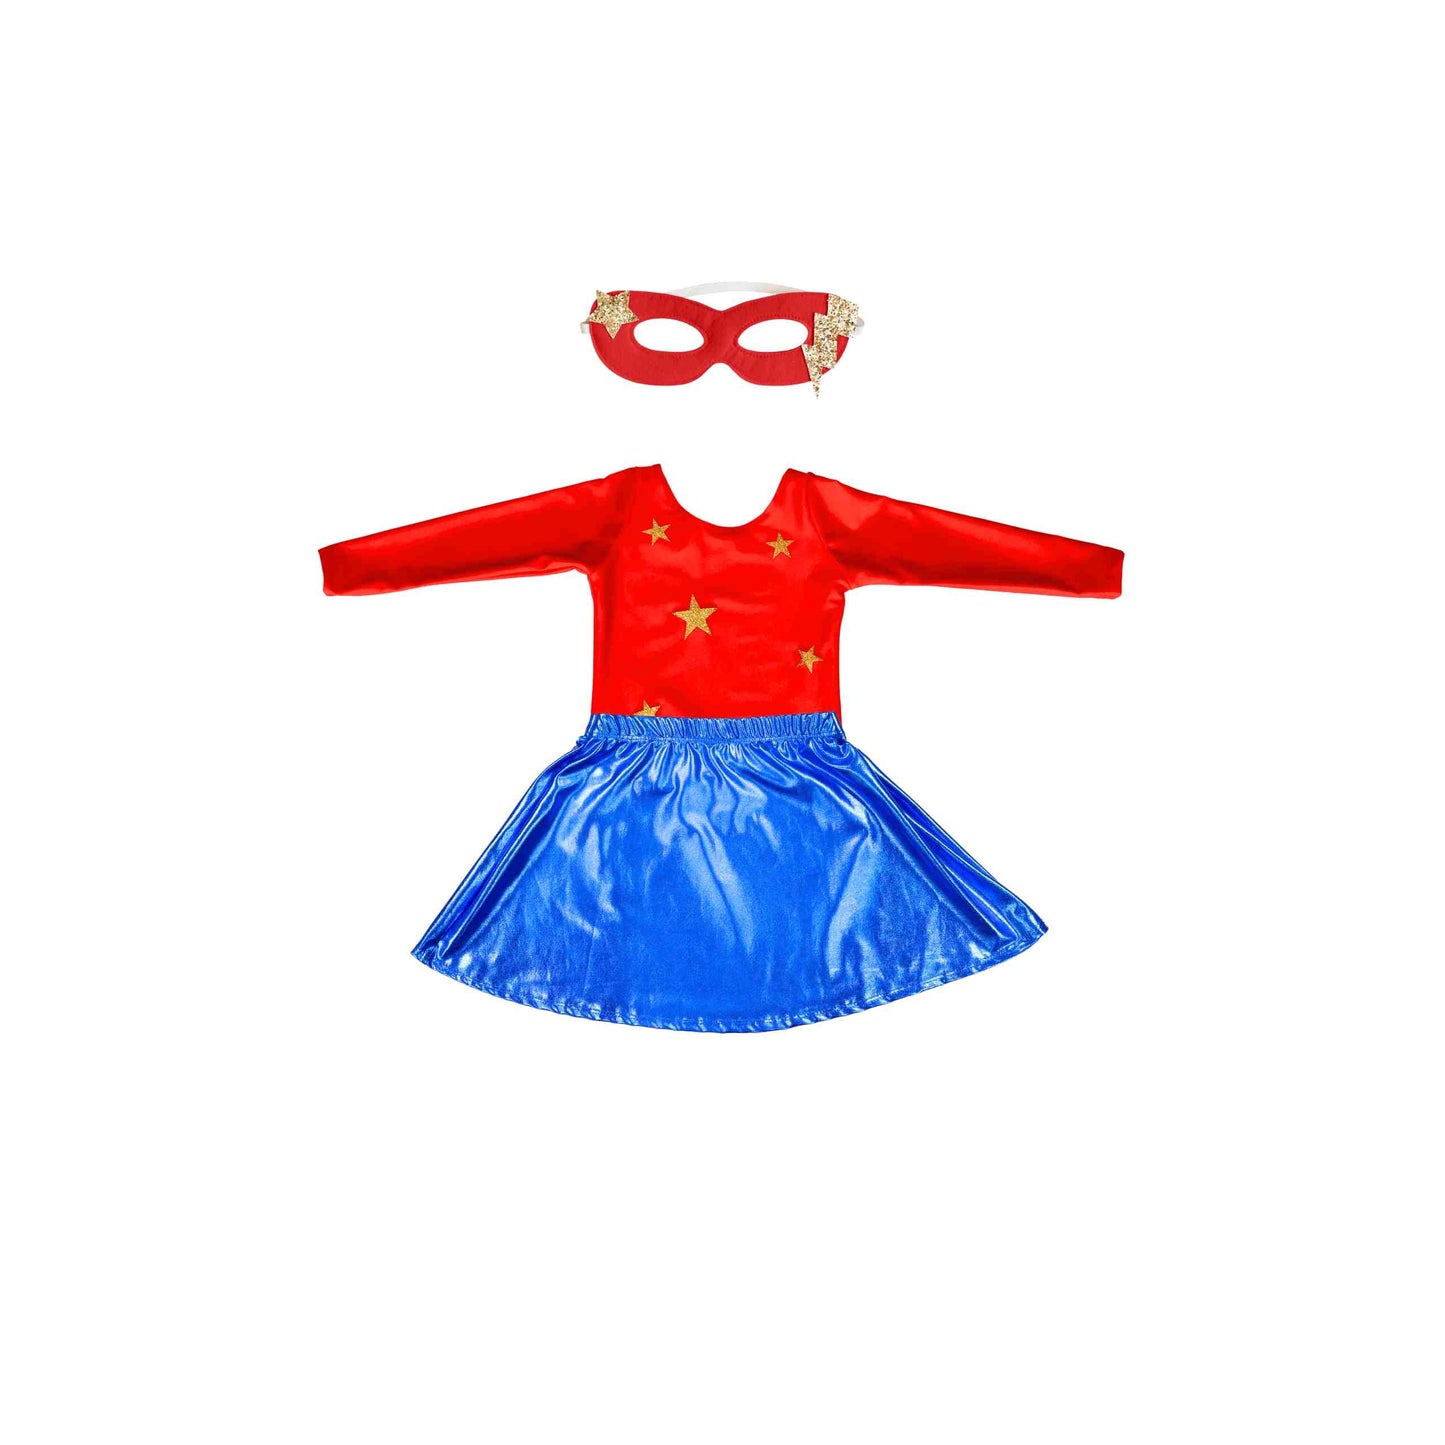 All Star Costume Set, Red/Blue